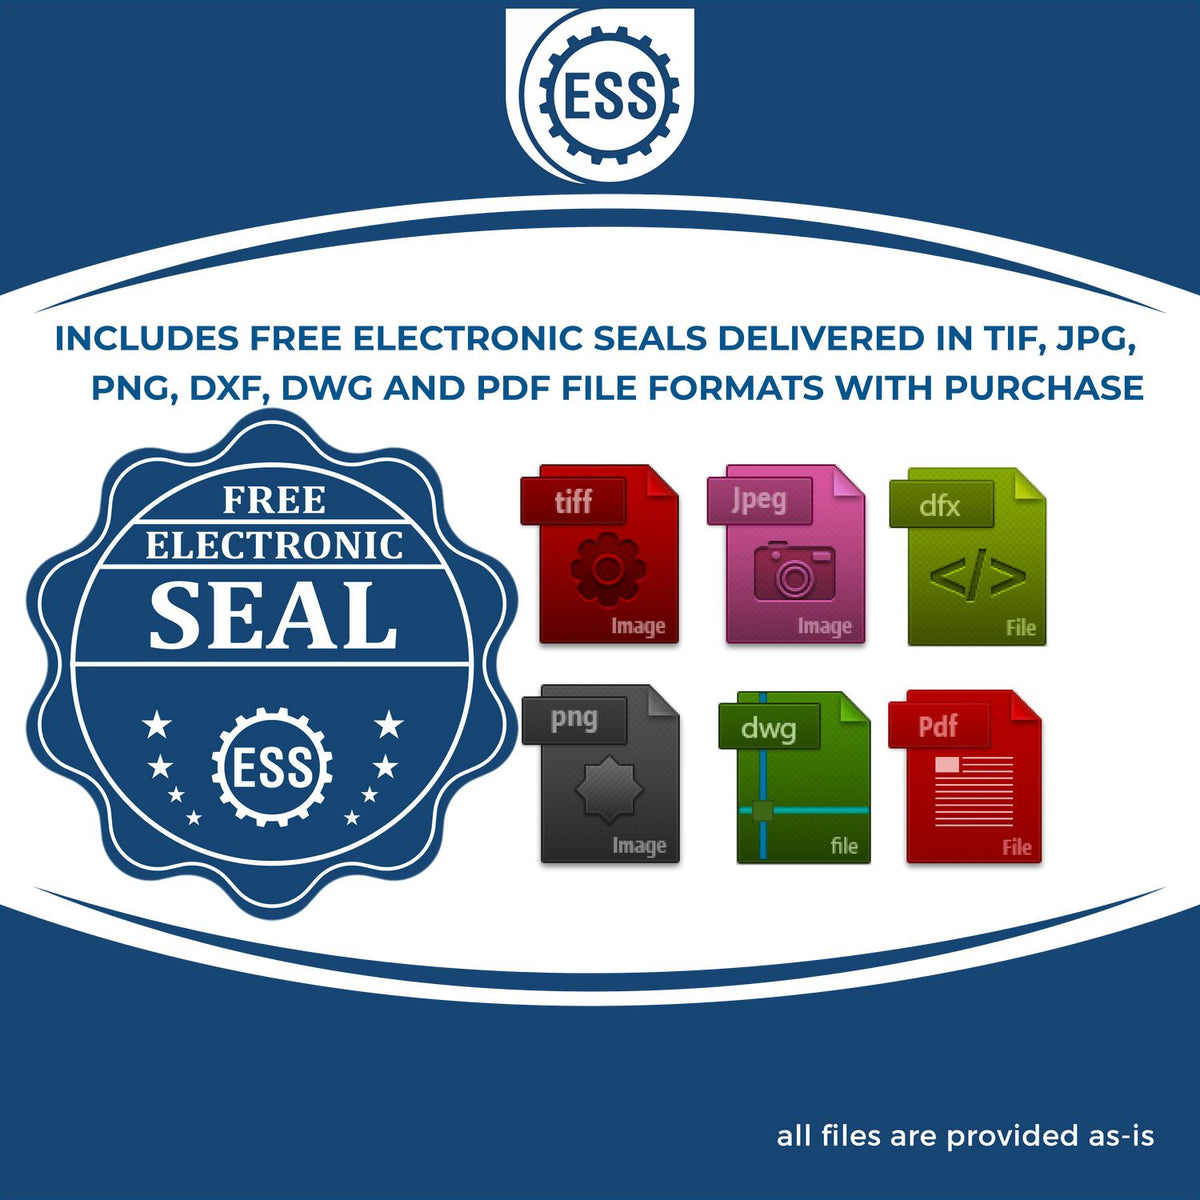 An infographic for the free electronic seal for the Gift New Hampshire Geologist Seal illustrating the different file type icons such as DXF, DWG, TIF, JPG and PNG.